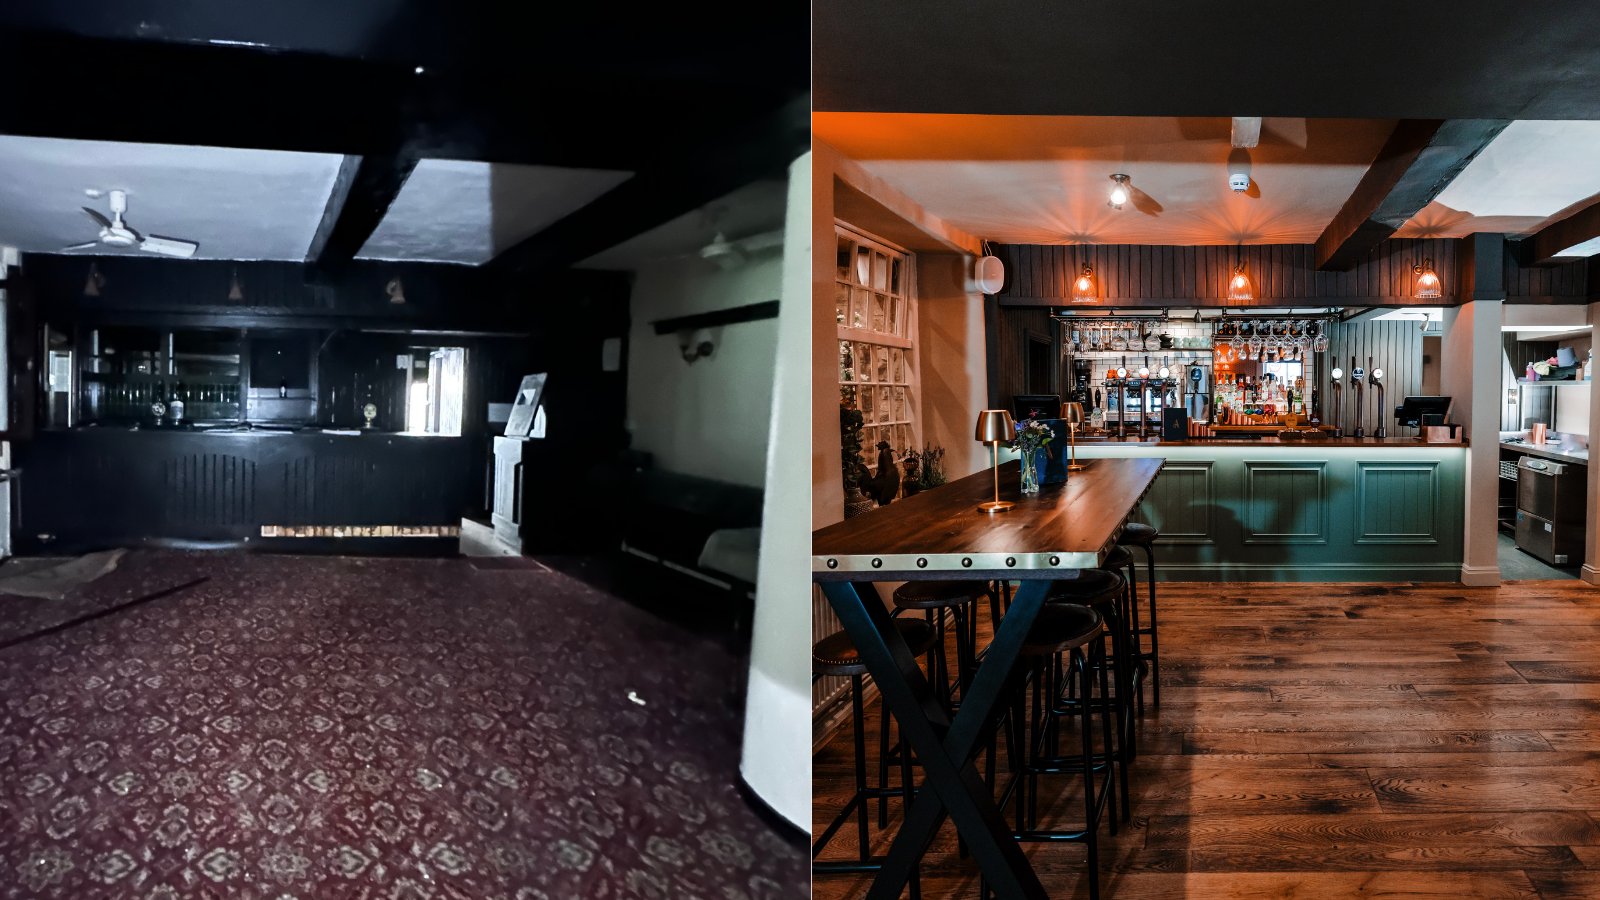 A side by side photo showing the bar area at The Ashford Arms before and after refurbishment